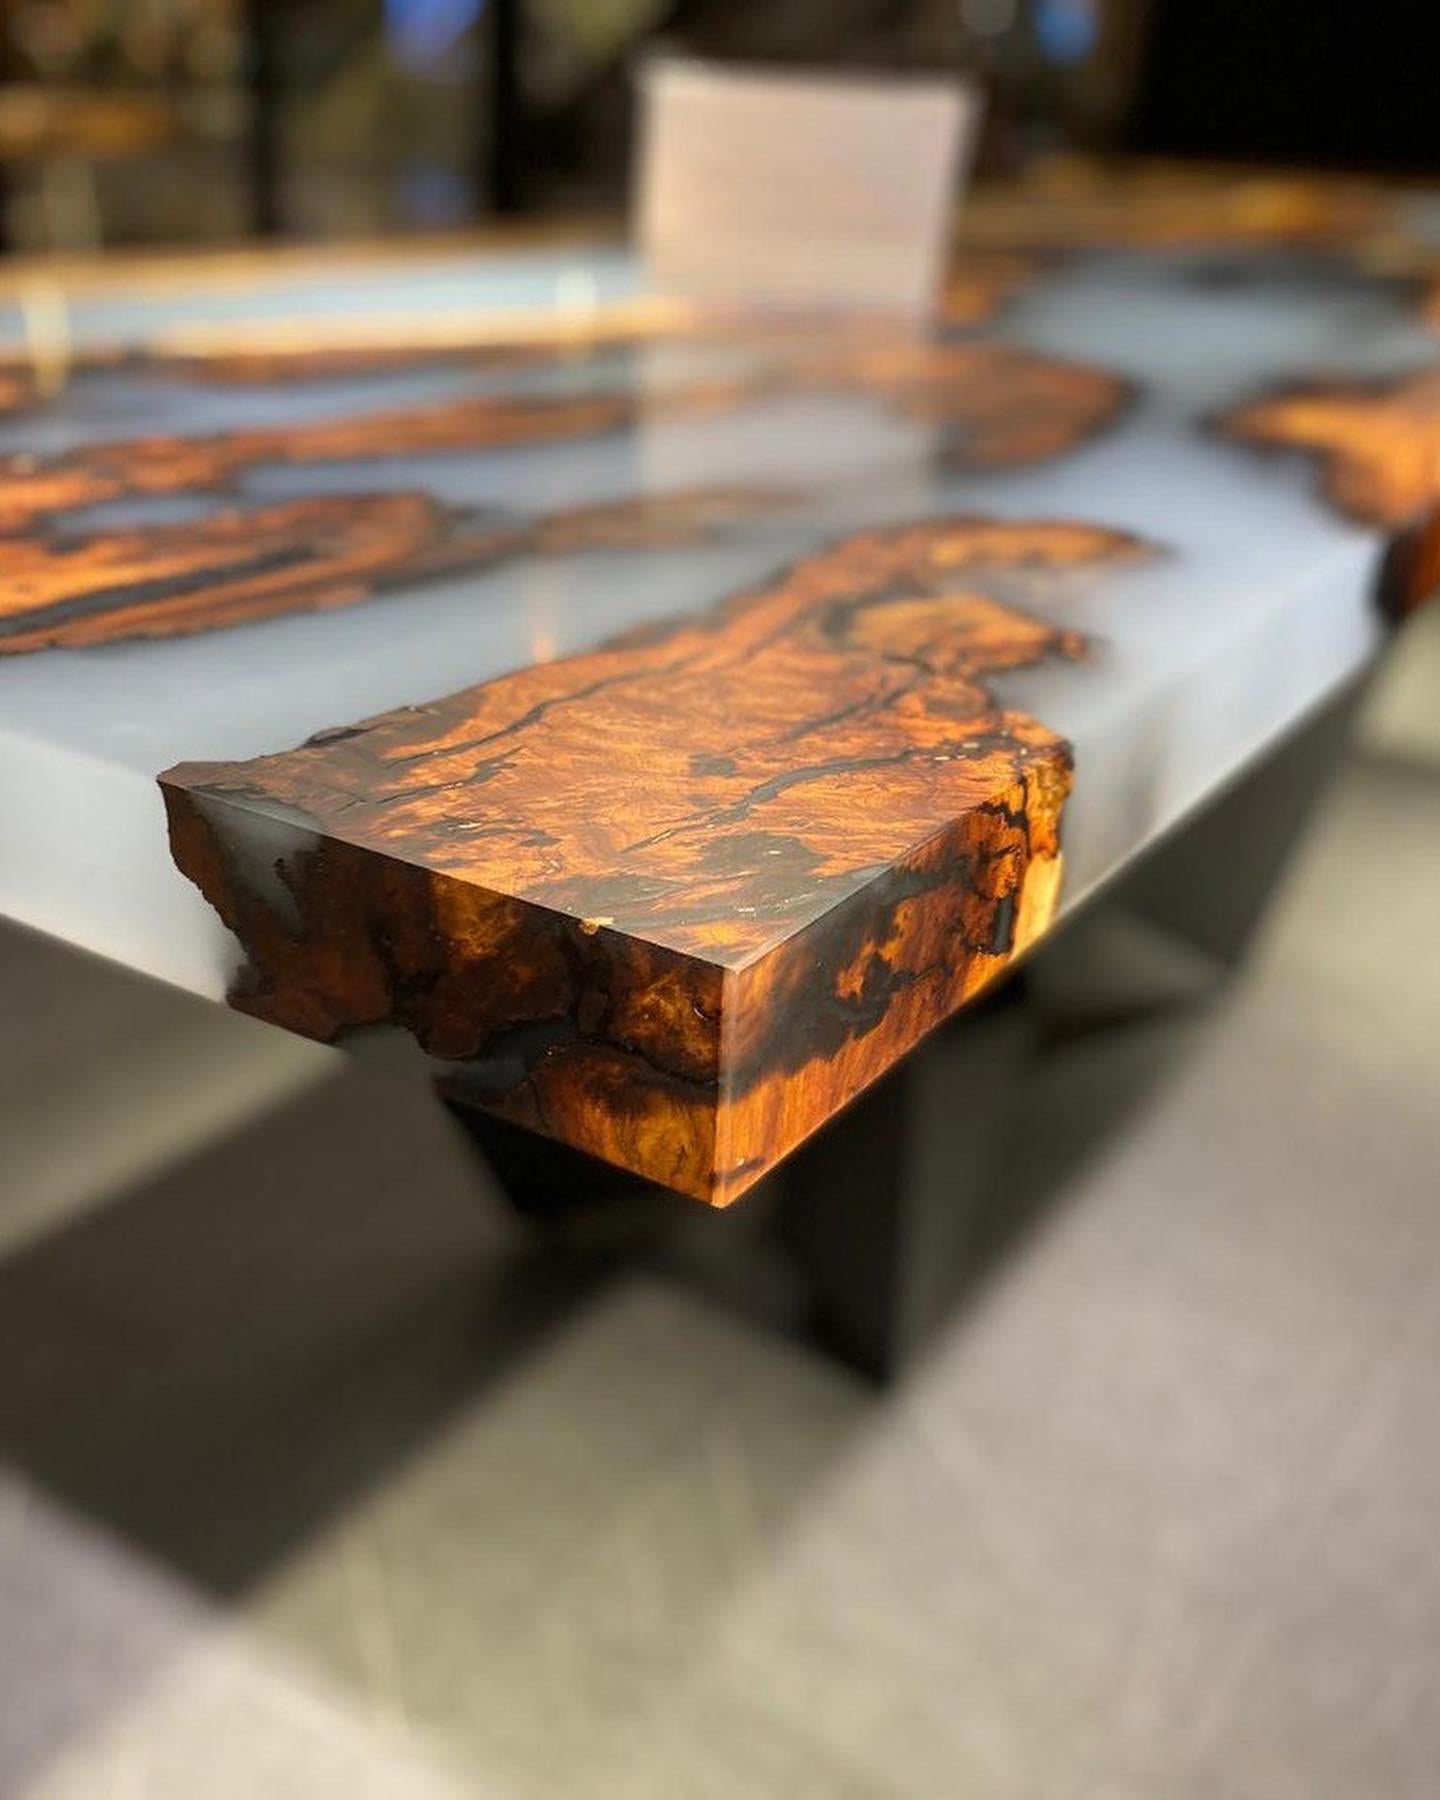 HACKBERRY CREAM EPOXY RESIN DINING TABLE

This epoxy table emerges as a unique work of art, inspired by nature's beauty. 

The epoxy table stands out not only for its design but also its durability. Thanks to its epoxy coating, it is highly